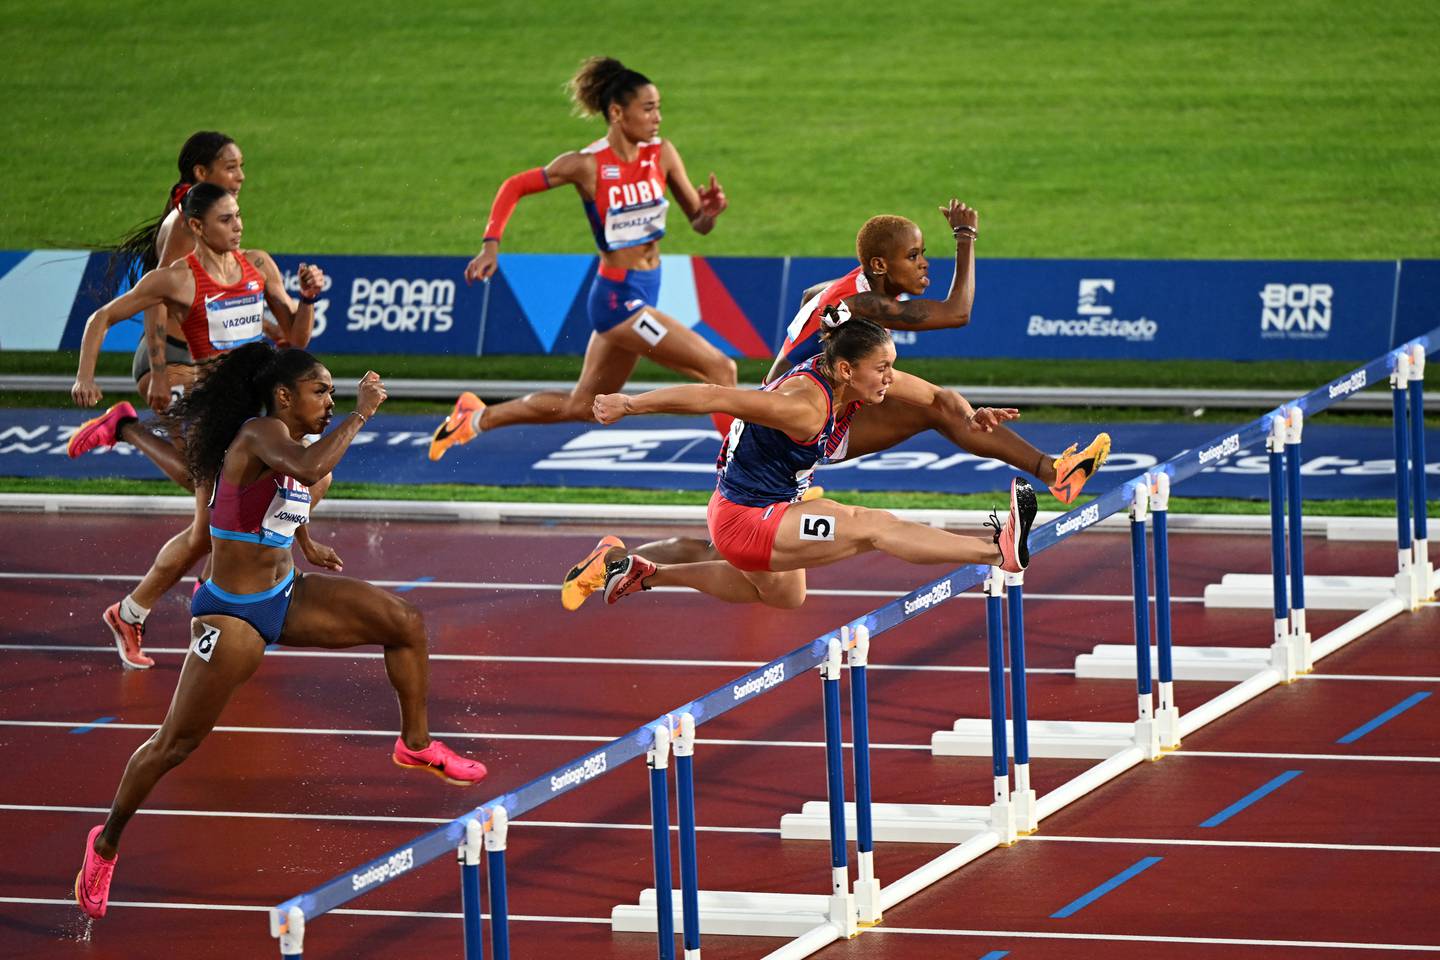 Costa Rica's Andrea Carolina Vargas Mena crosses the line to win the women's 100m hurdles final of the Pan American Games Santiago 2023 at the National Stadium in Santiago, on November 1st, 2023. (Photo by MAURO PIMENTEL / AFP)